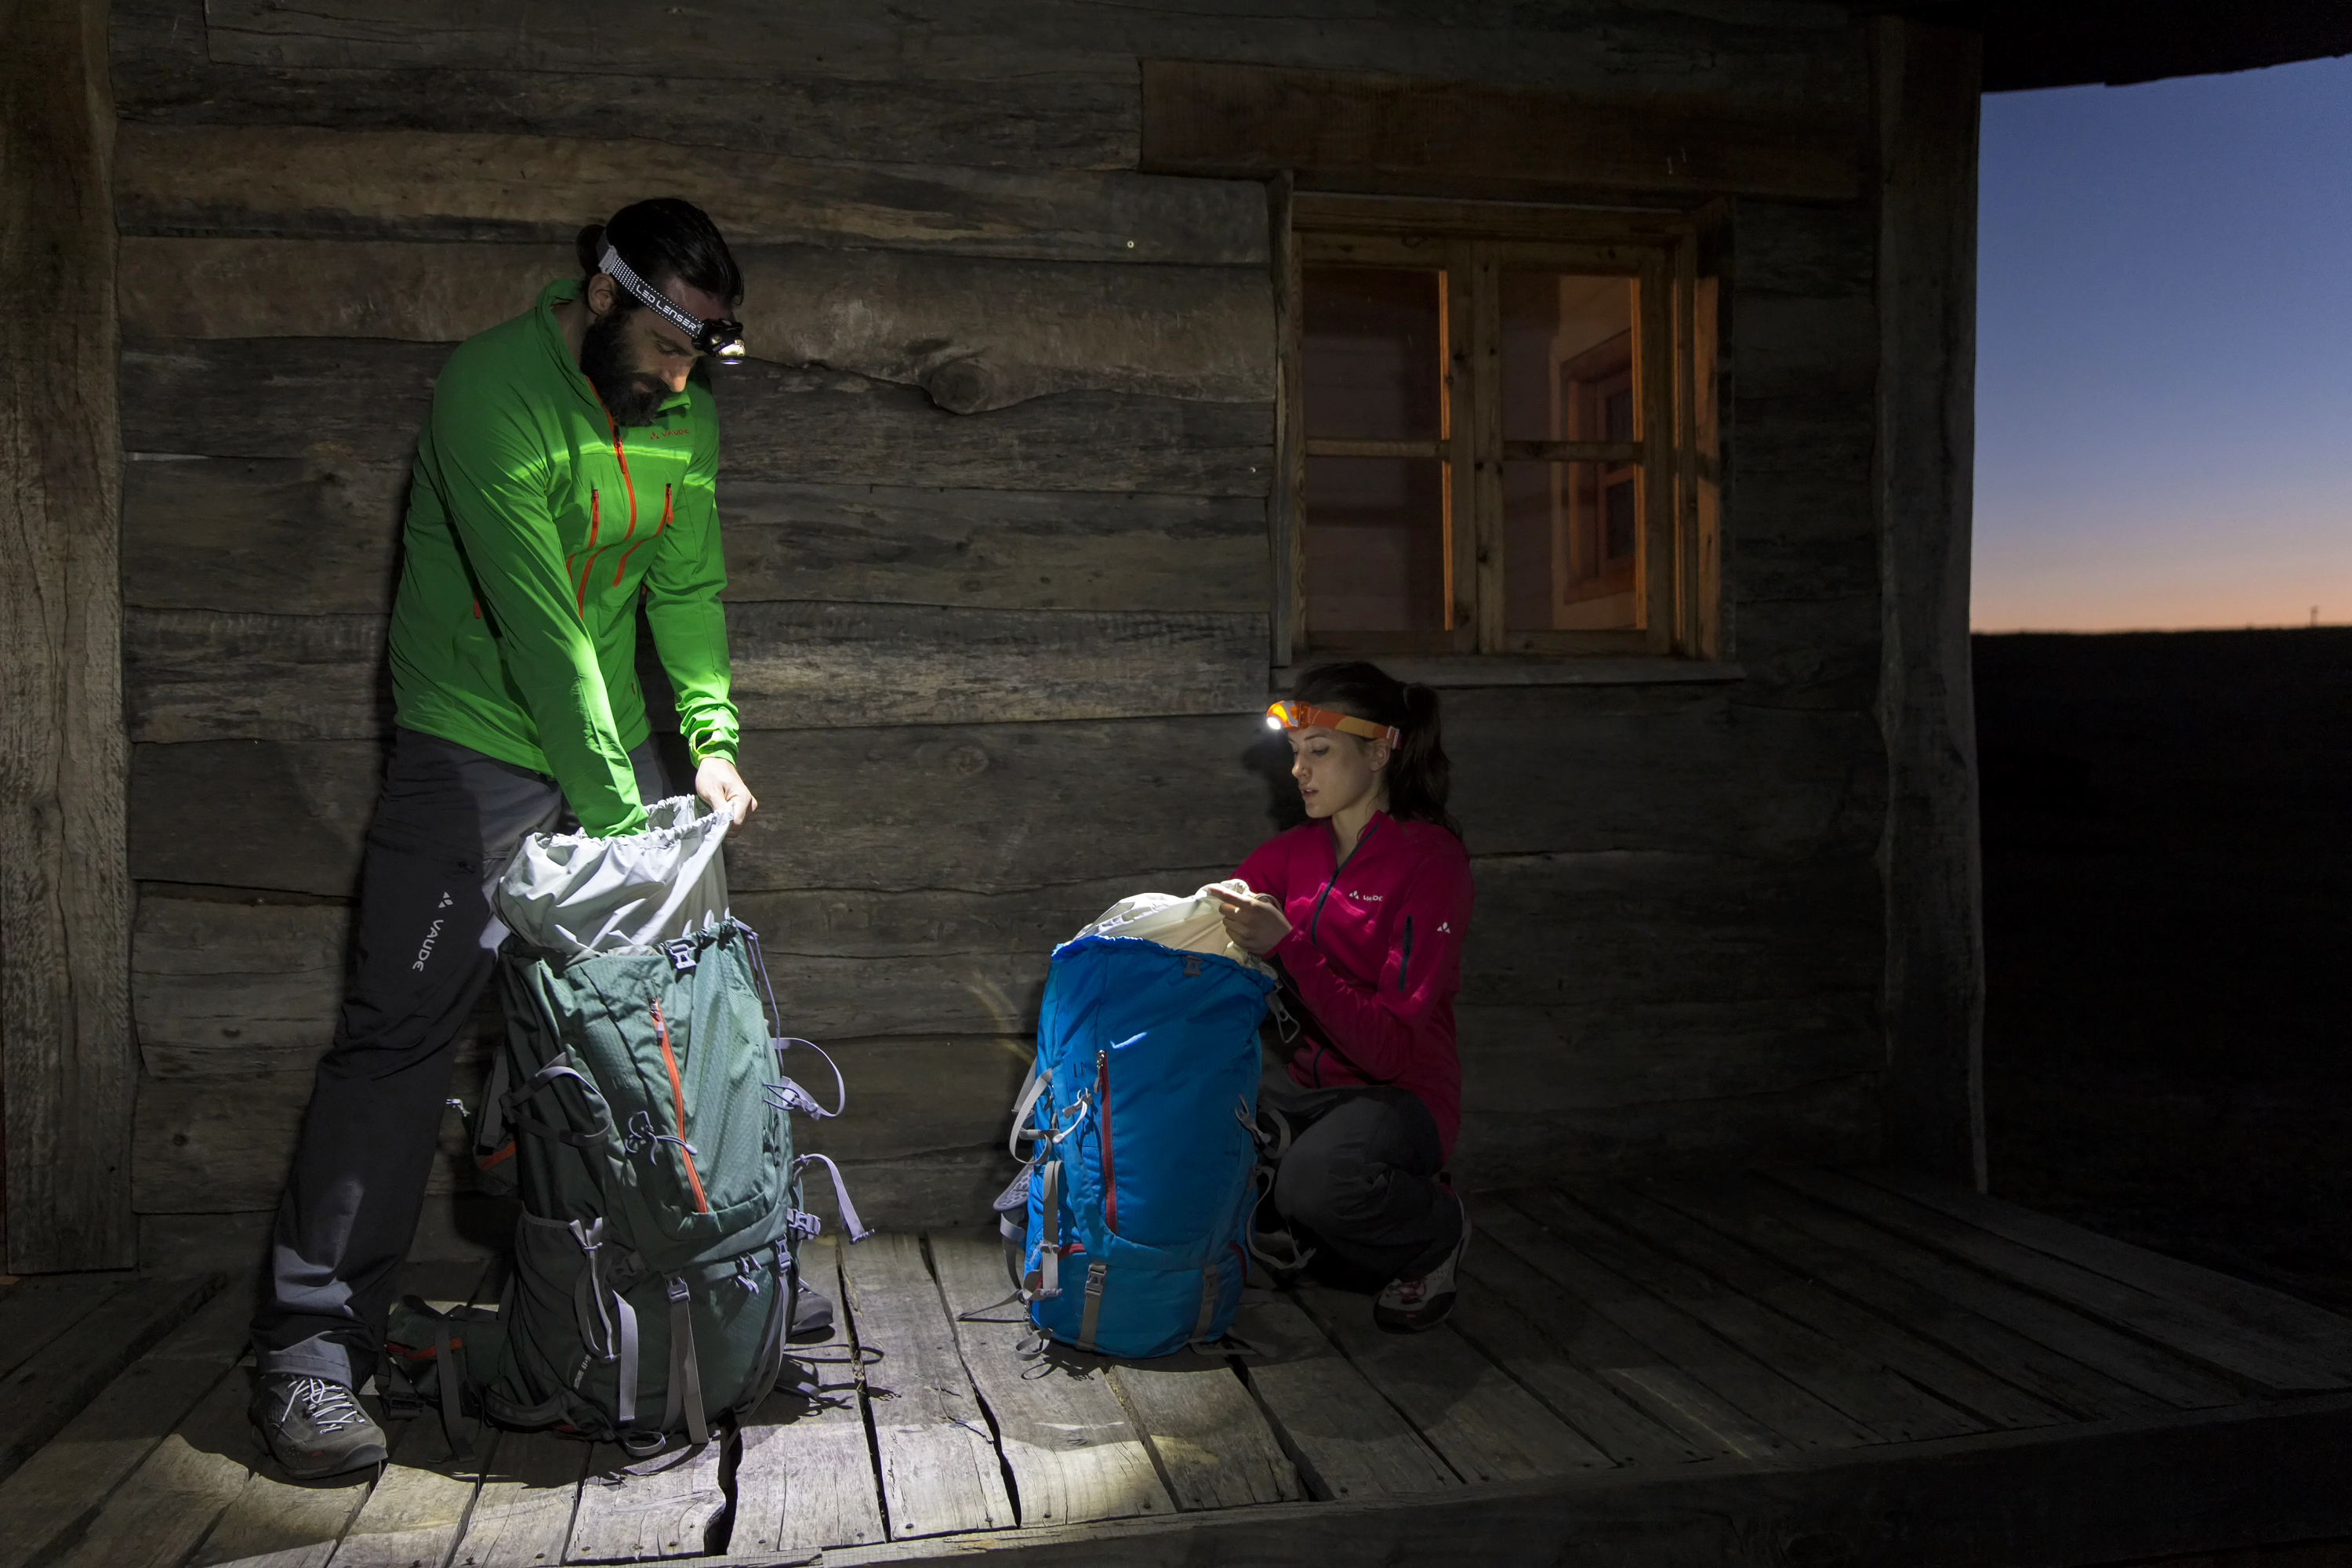 Man and woman with hedlamps packing their backpacks